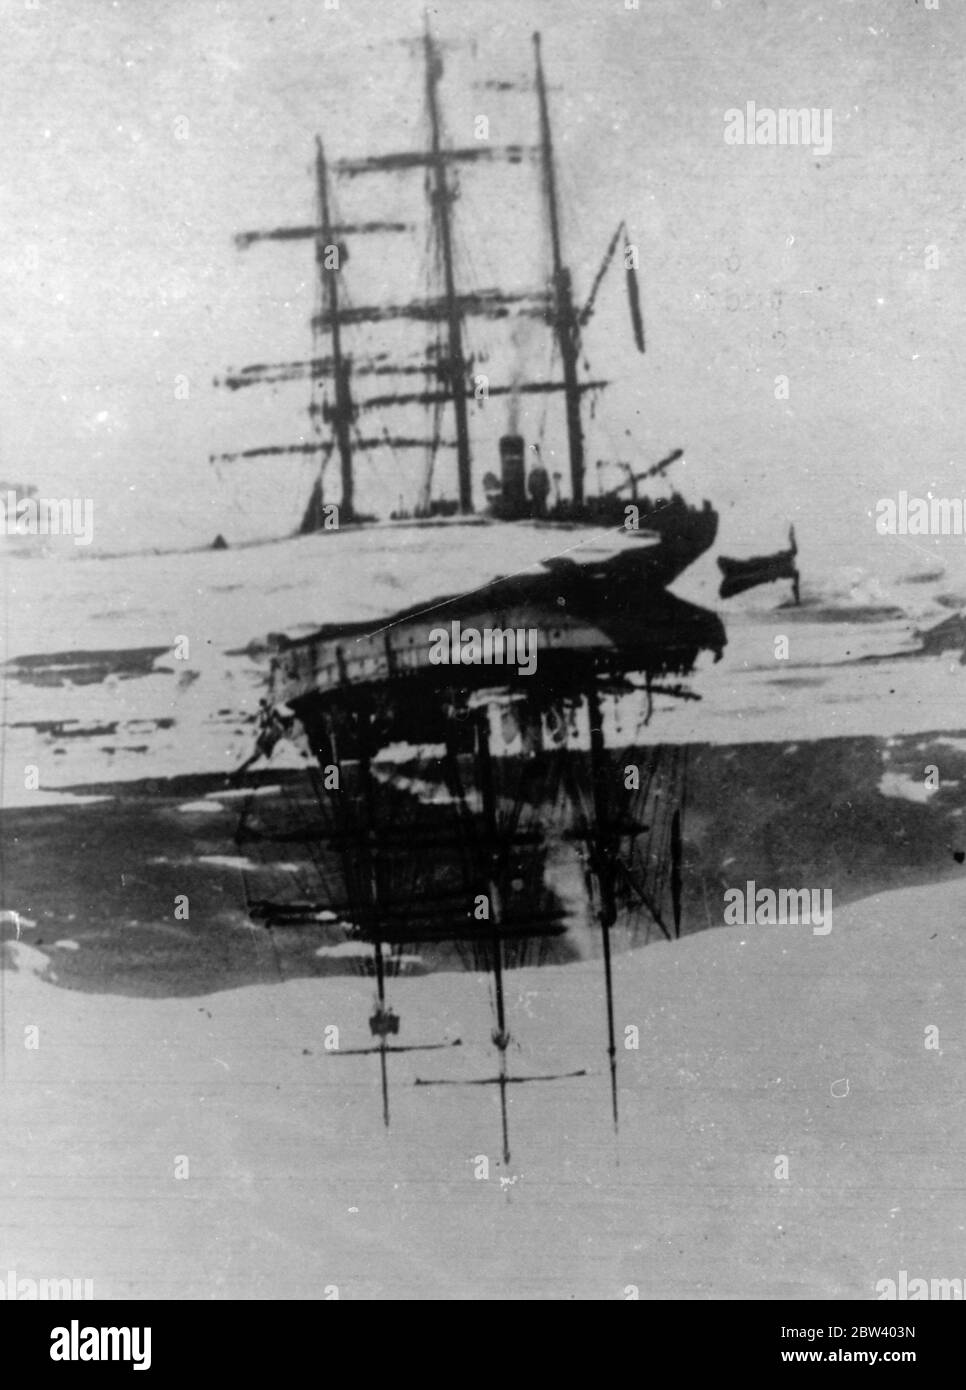 Famous French Polar explorer and crew drowned when ship founders in Iceland storm. Sailing on his last voyage, Dr Jean Baptiste Charcott, Shackleton of France and 29 members of the crew of his famous Polar exploring ship the Pourquoi-Pas (449 tons) were drowned when the vessel sank in a storm in Faxa Bay, Iceland. The ship ran aground, but terrific waves breaking over her prevented the launching of the lifeboats. Every man was washed overboard, and only one survived. Dr Charcot was 69, led two expeditions to the South Polar regions. Photo shows: The Pourquoi Pas in the ice off Greenland. 17 Se Stock Photo